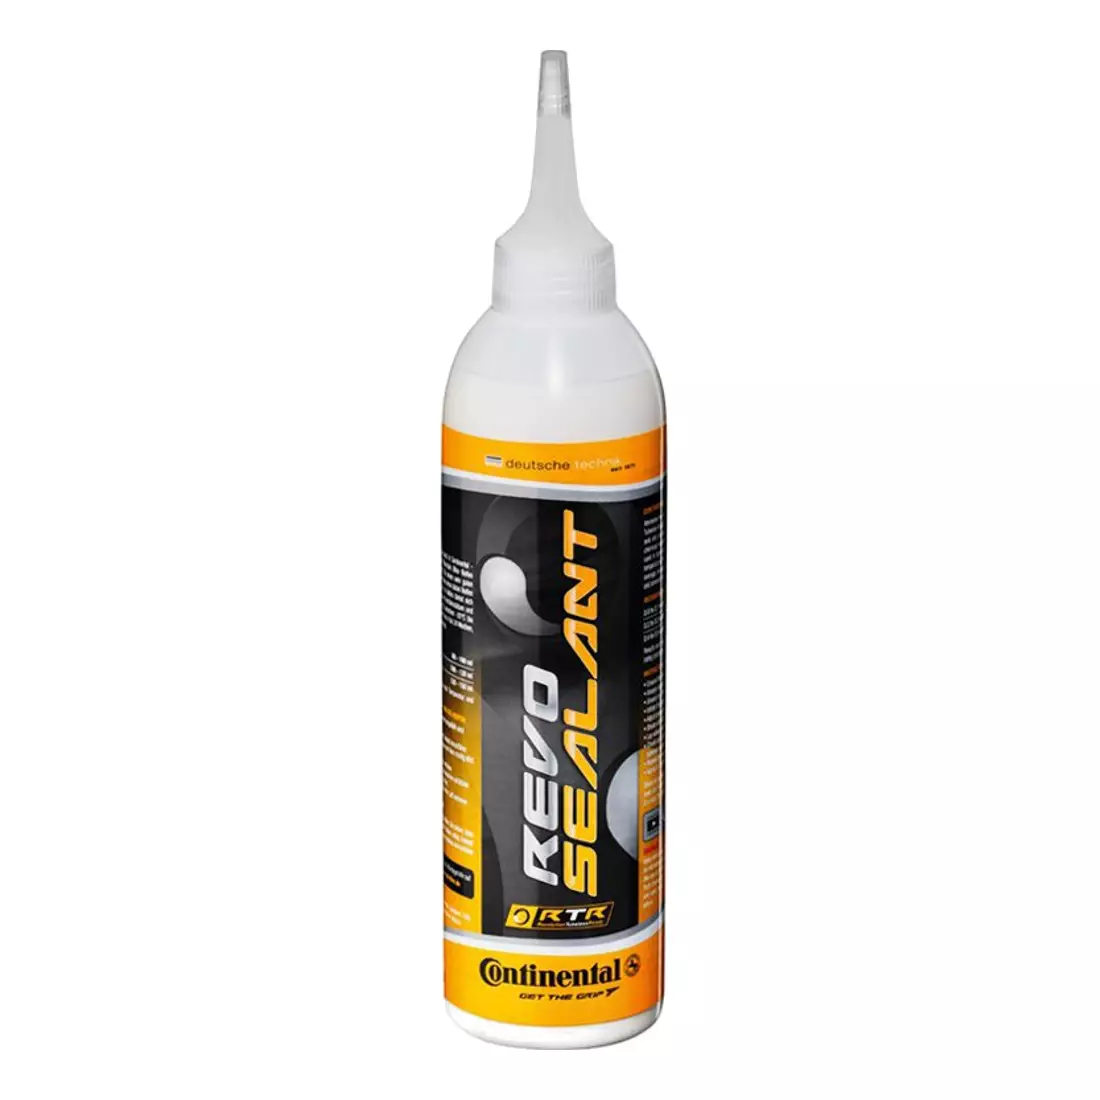 CONTINENTAL Revo Sealant Sealer For Bicycle Tires / Tubes, 60ml 